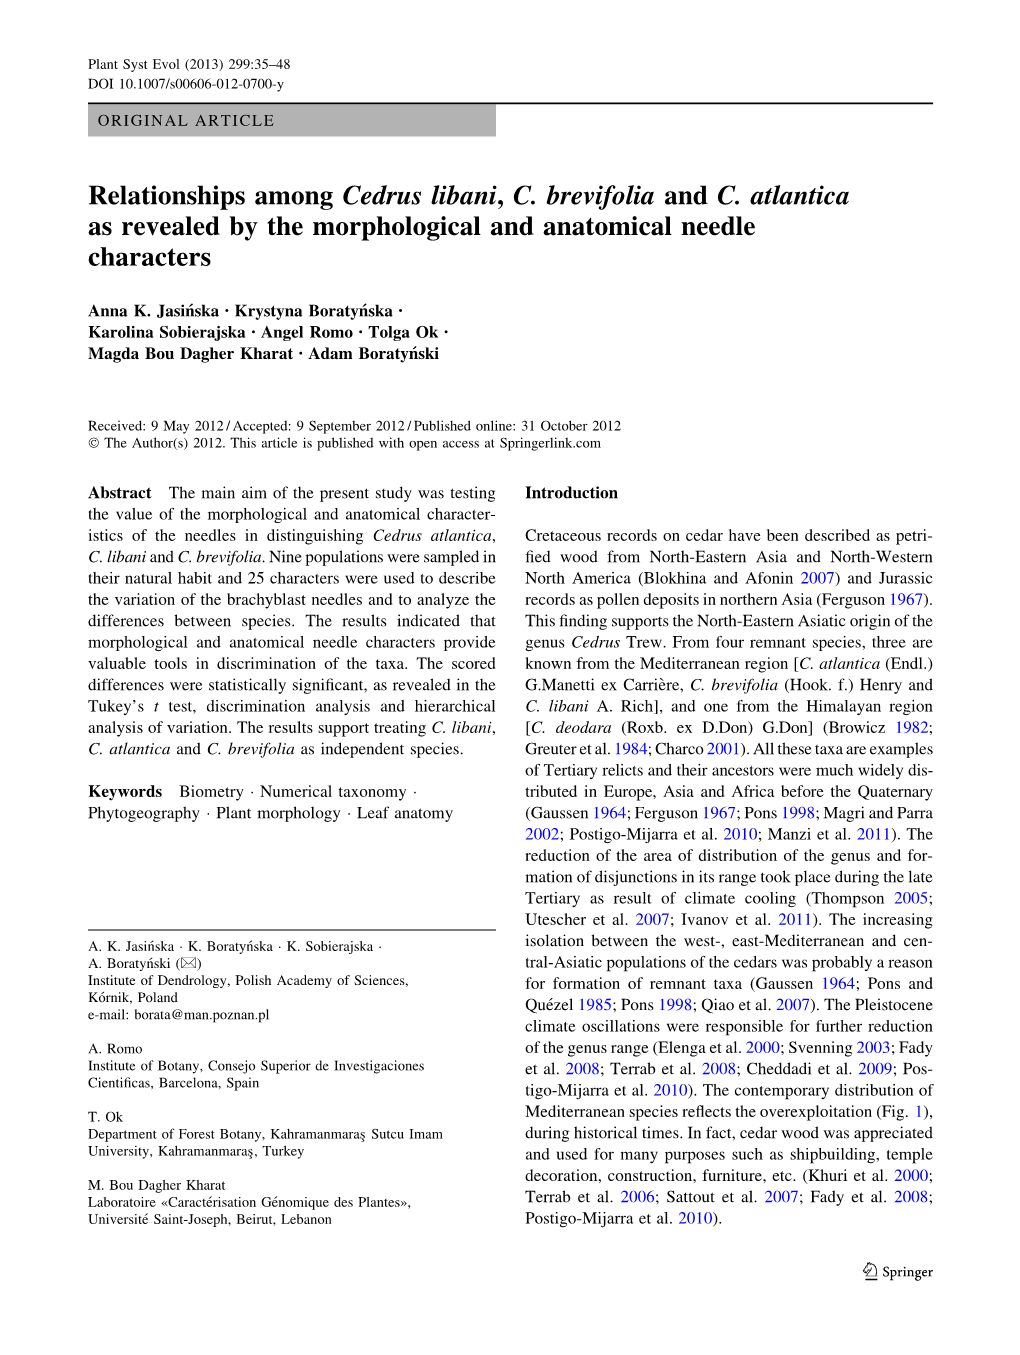 Relationships Among Cedrus Libani, C. Brevifolia and C. Atlantica As Revealed by the Morphological and Anatomical Needle Characters